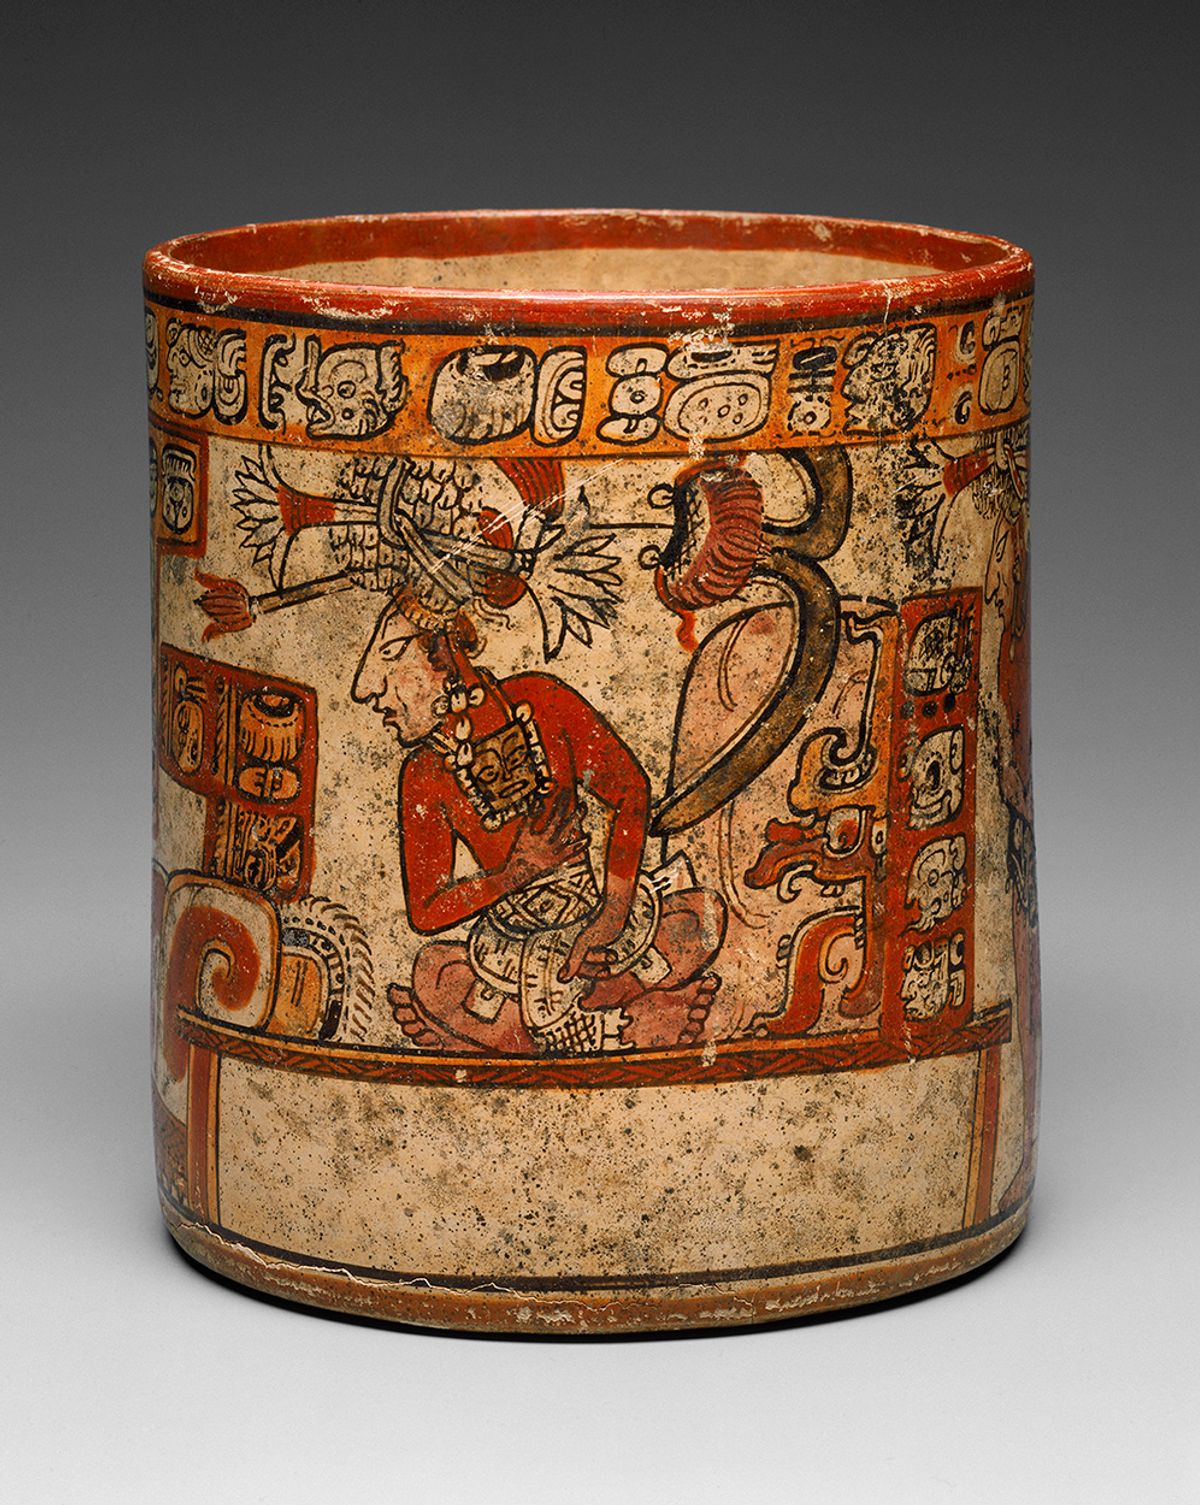 Plant power: Maya cylinder vase (AD700-800) showing a king wearing a water lily headdress
Photo: © Museum of Fine Arts, Boston